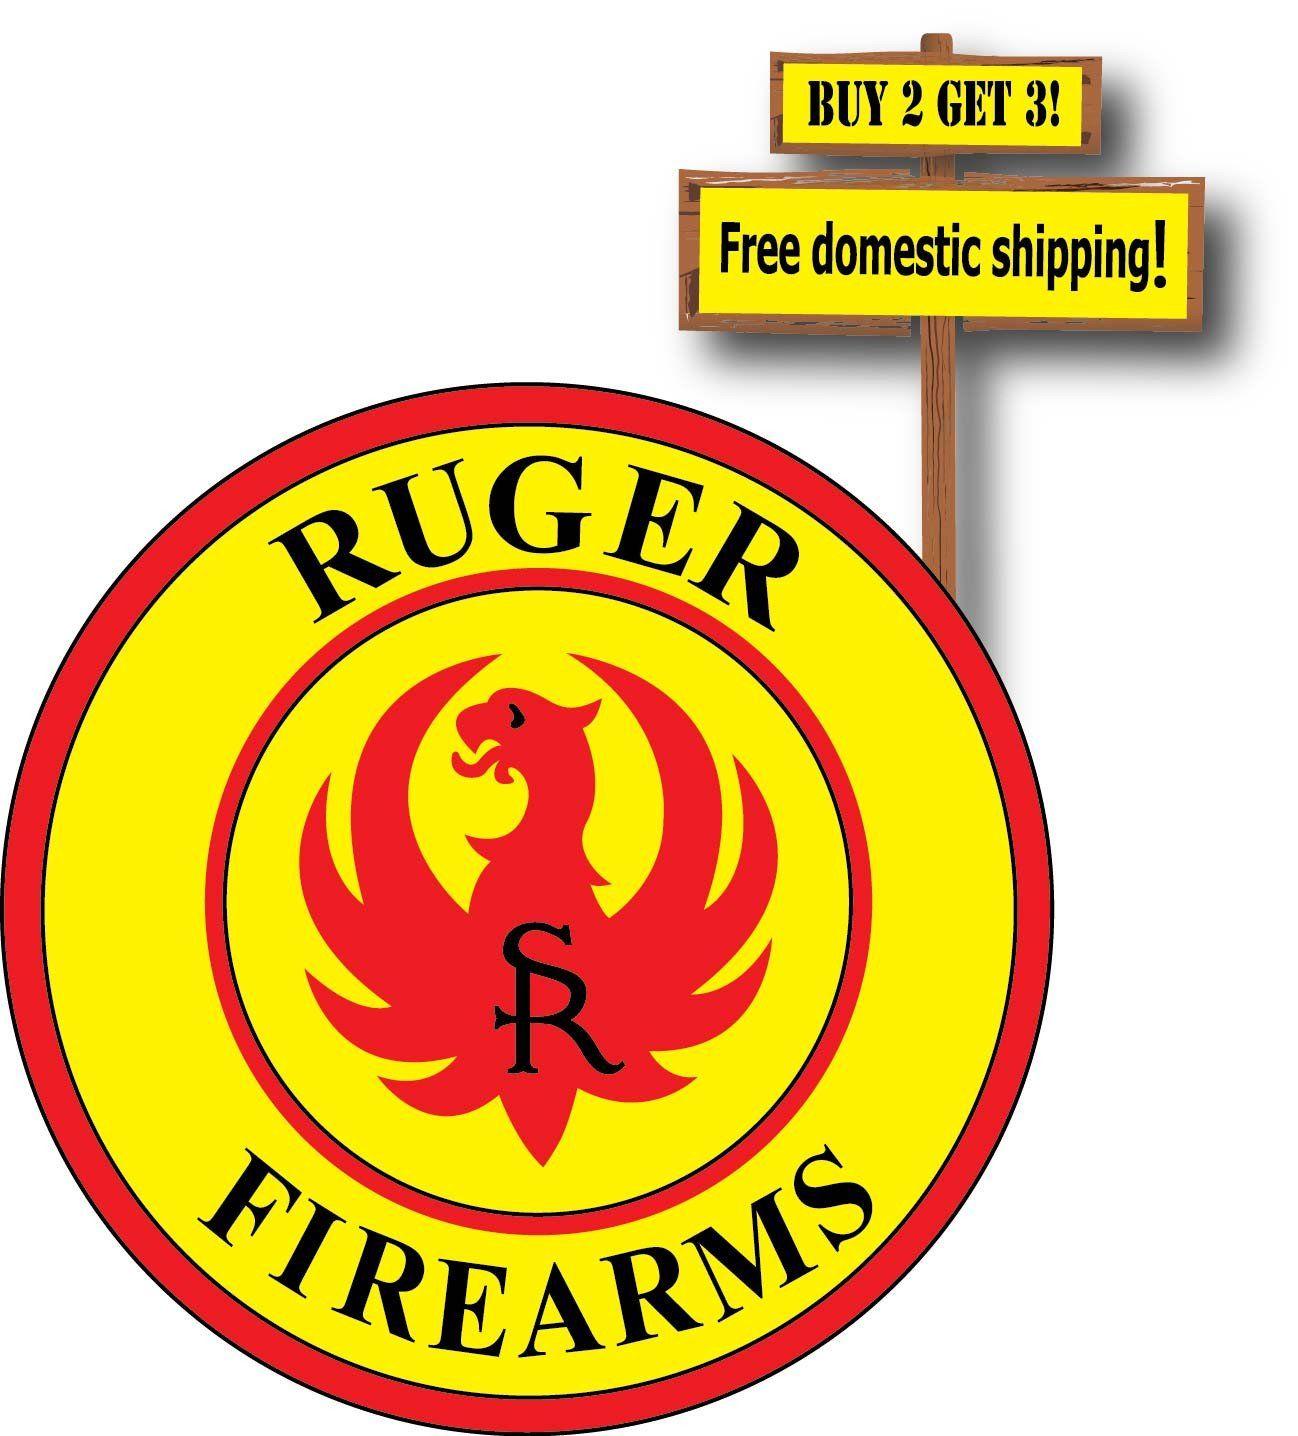 Ruger Arms Logo - Ruger Fire Arms LOGO Vinyl Defense Guns Weapons Full Color Decal ...